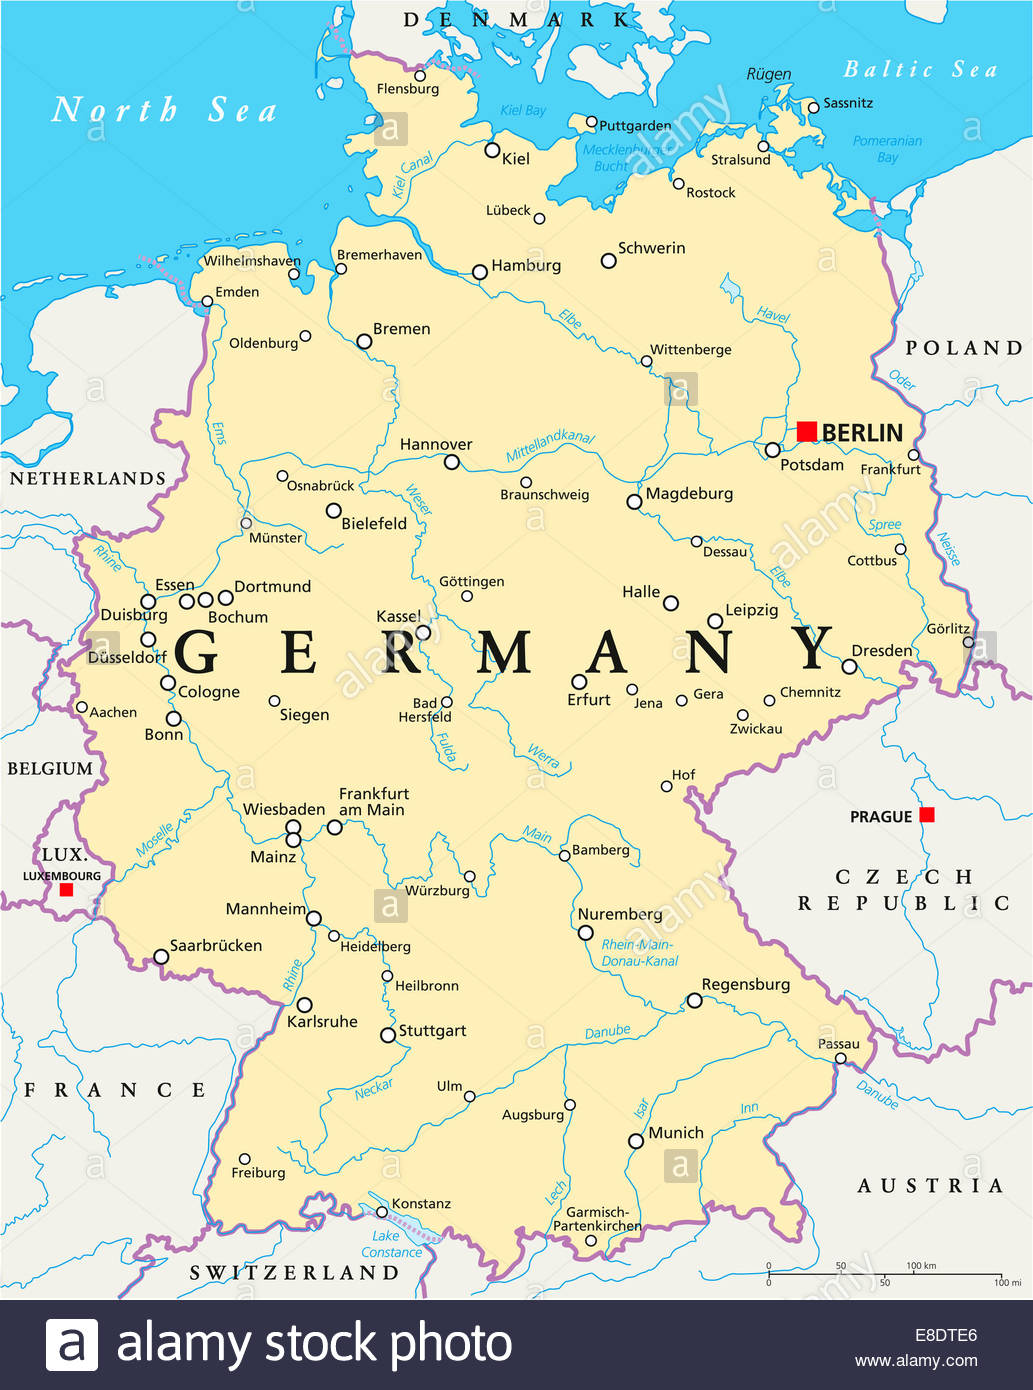 THE RELATIONSHIP OF GERMANY AND THE UNITED STATES - Home